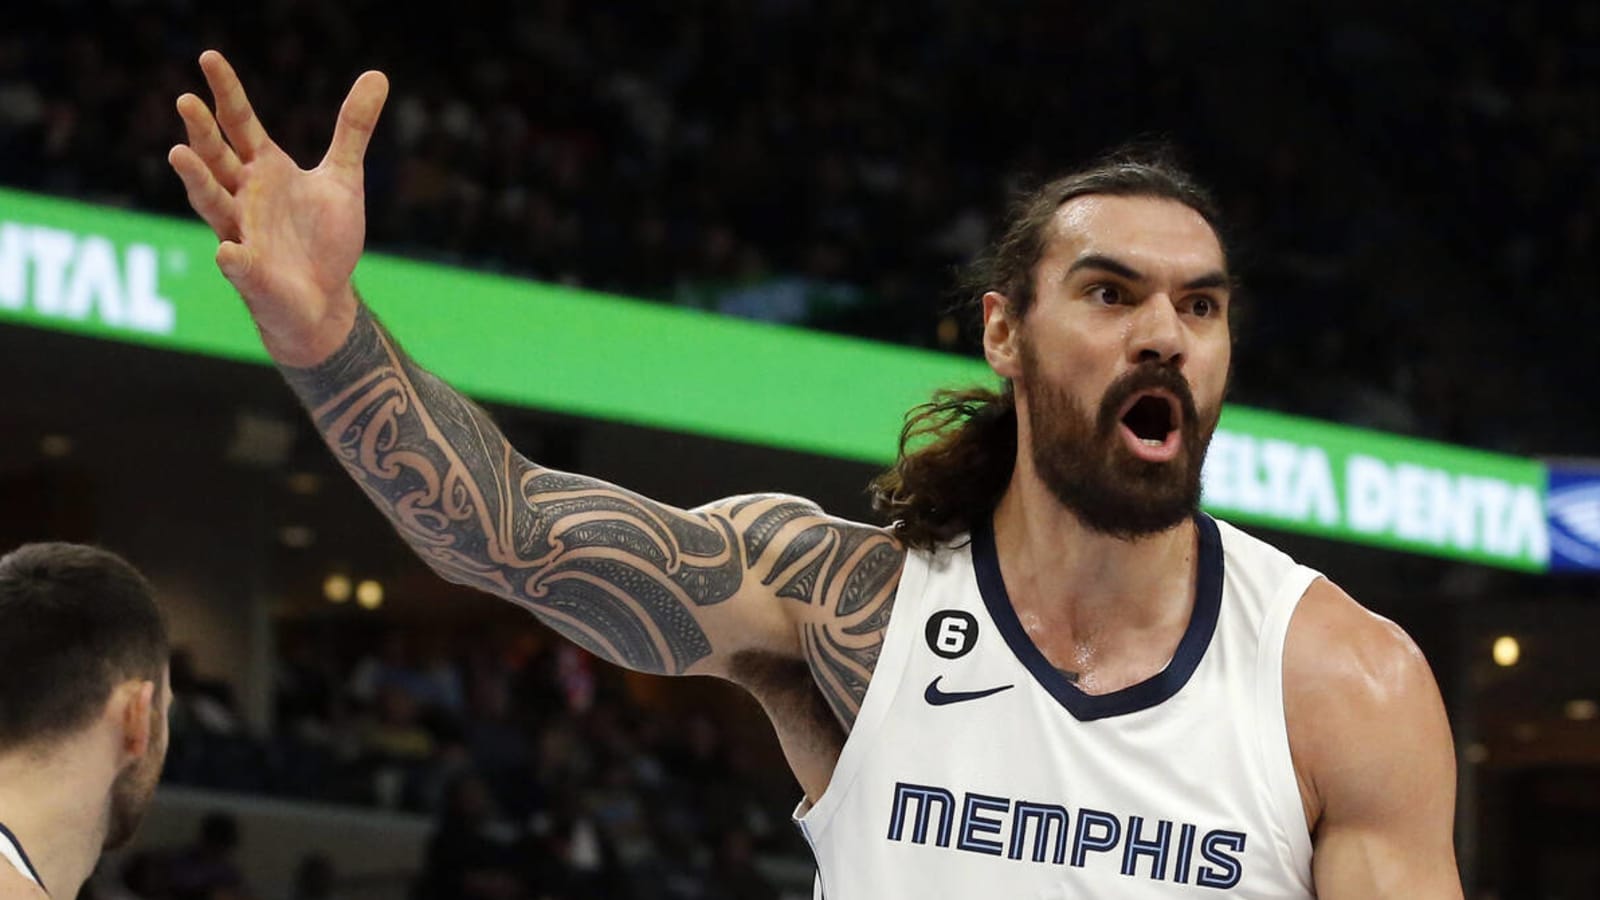 Grizzlies center Steven Adams out for season due to right knee